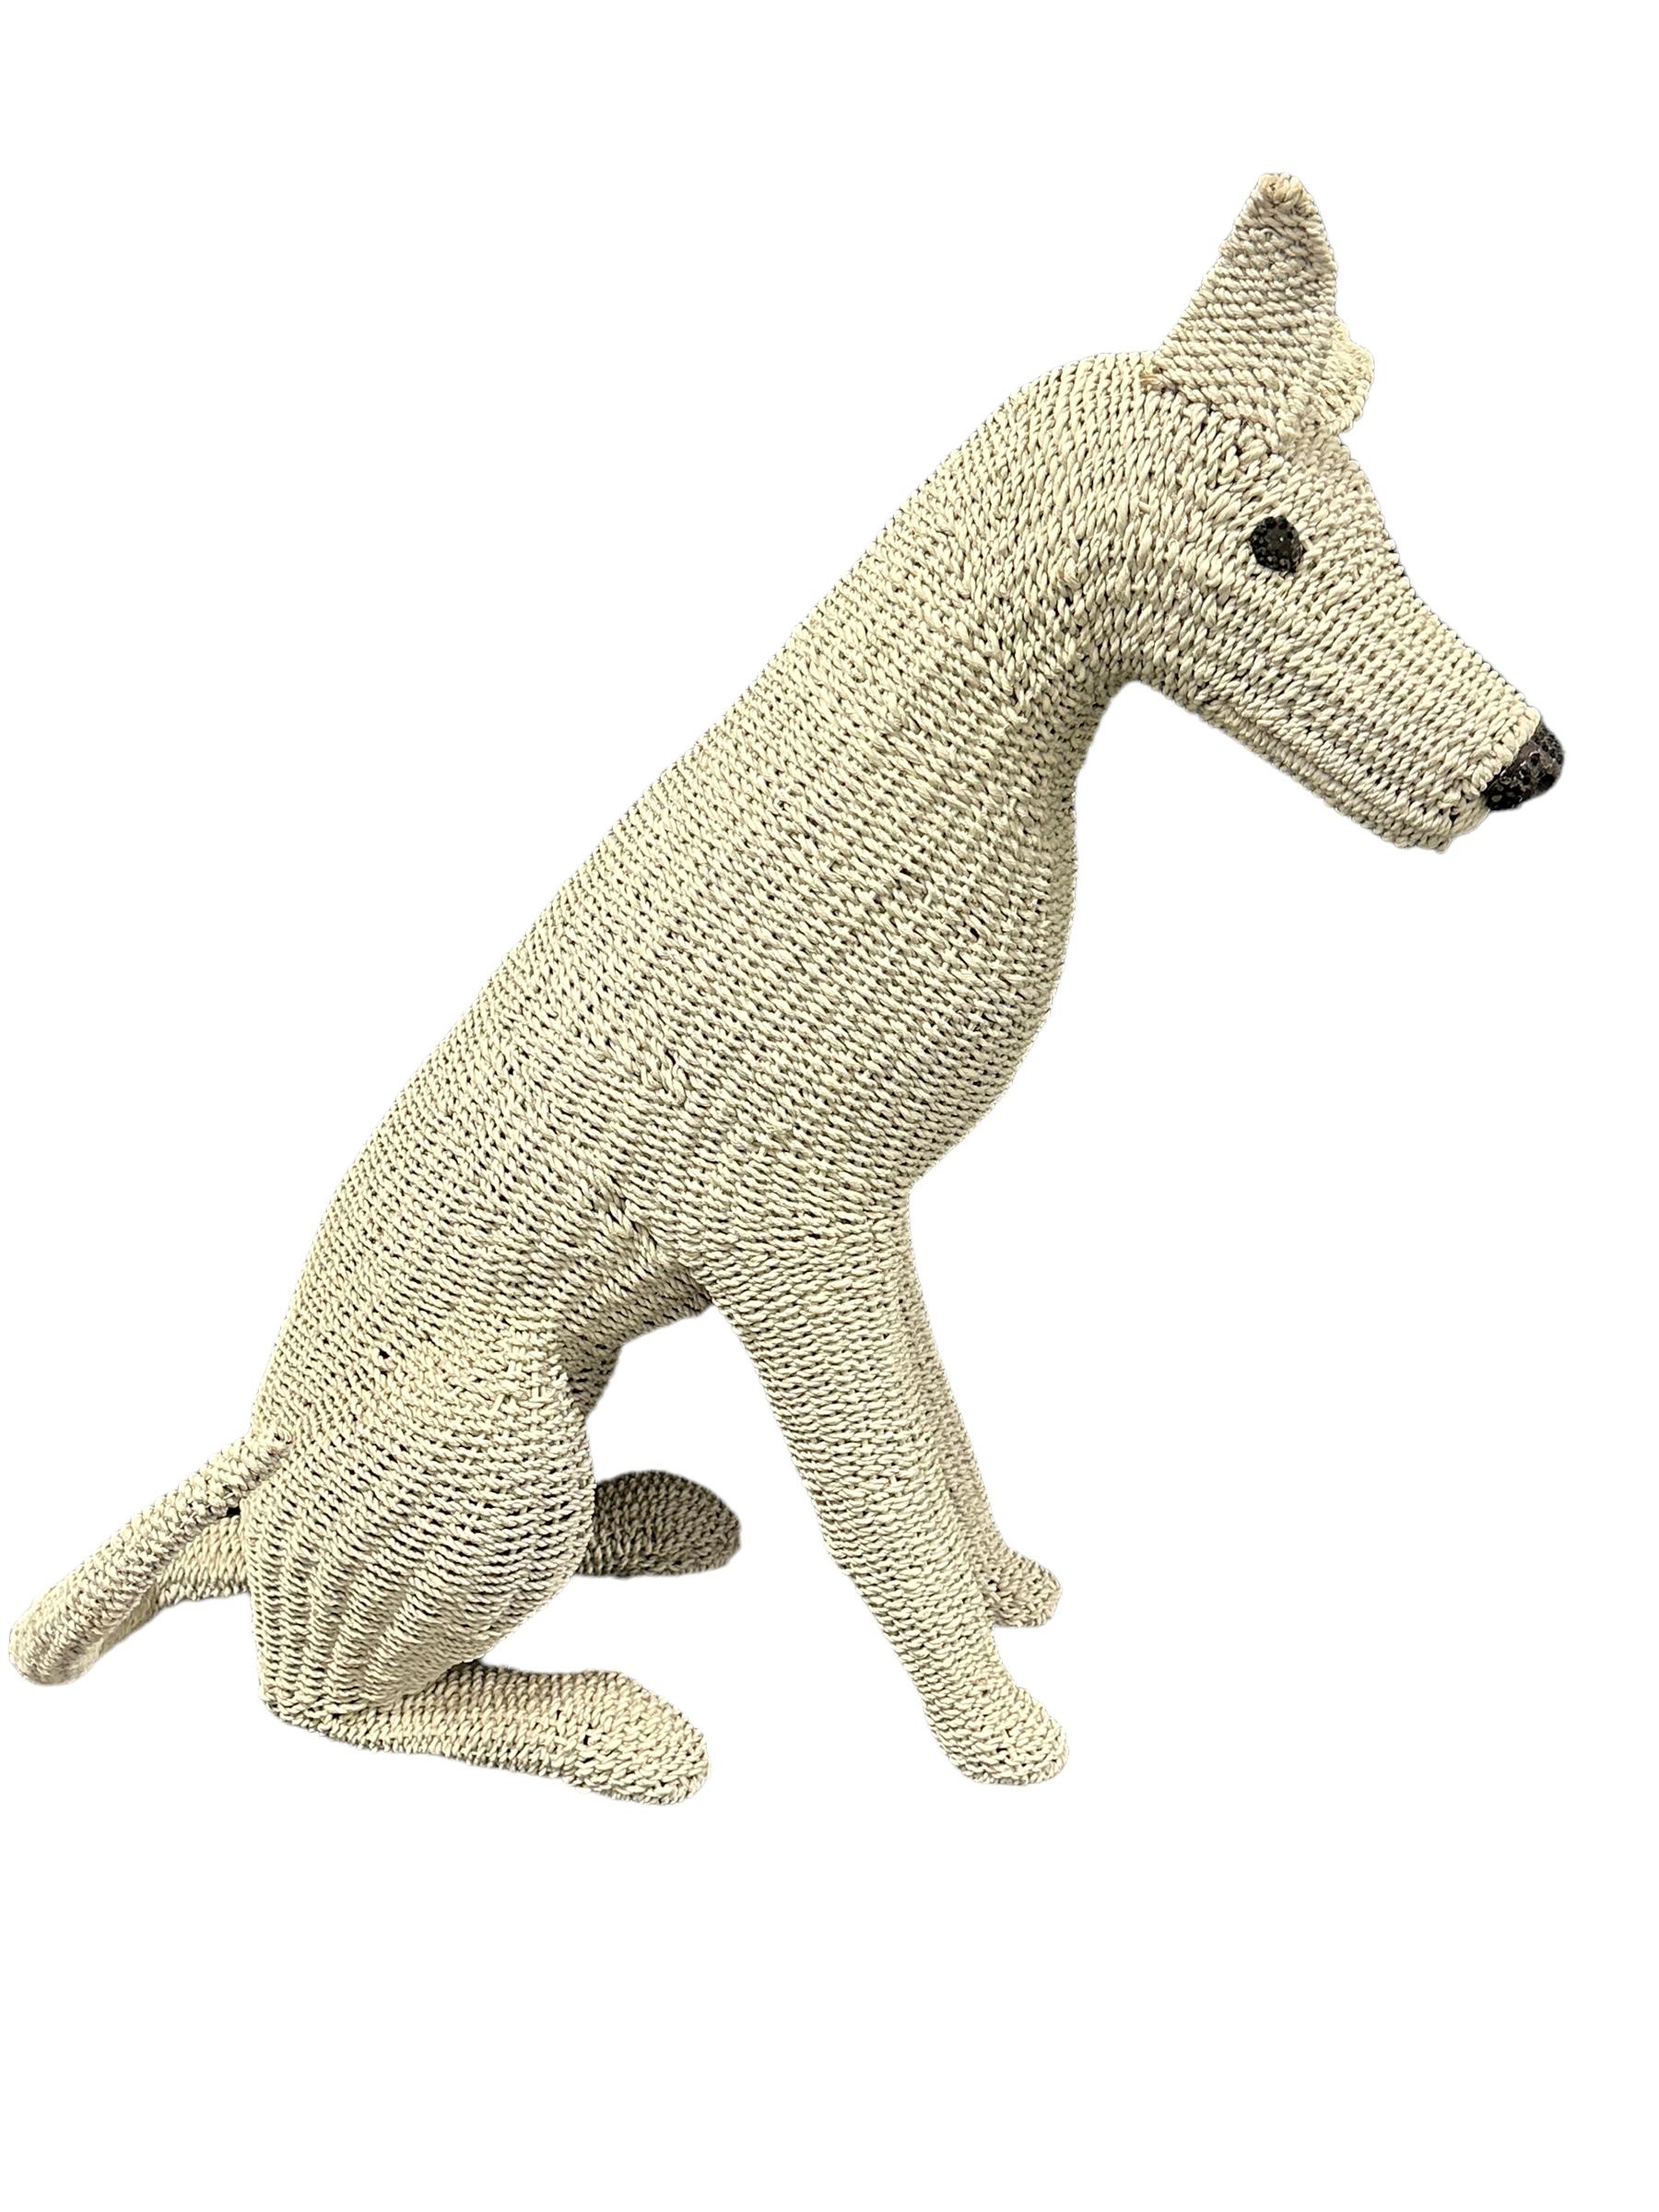 Hollywood Regency Stunning Life Size White Rattan Wicker Dog Statue Figure, Italy, 1960s For Sale